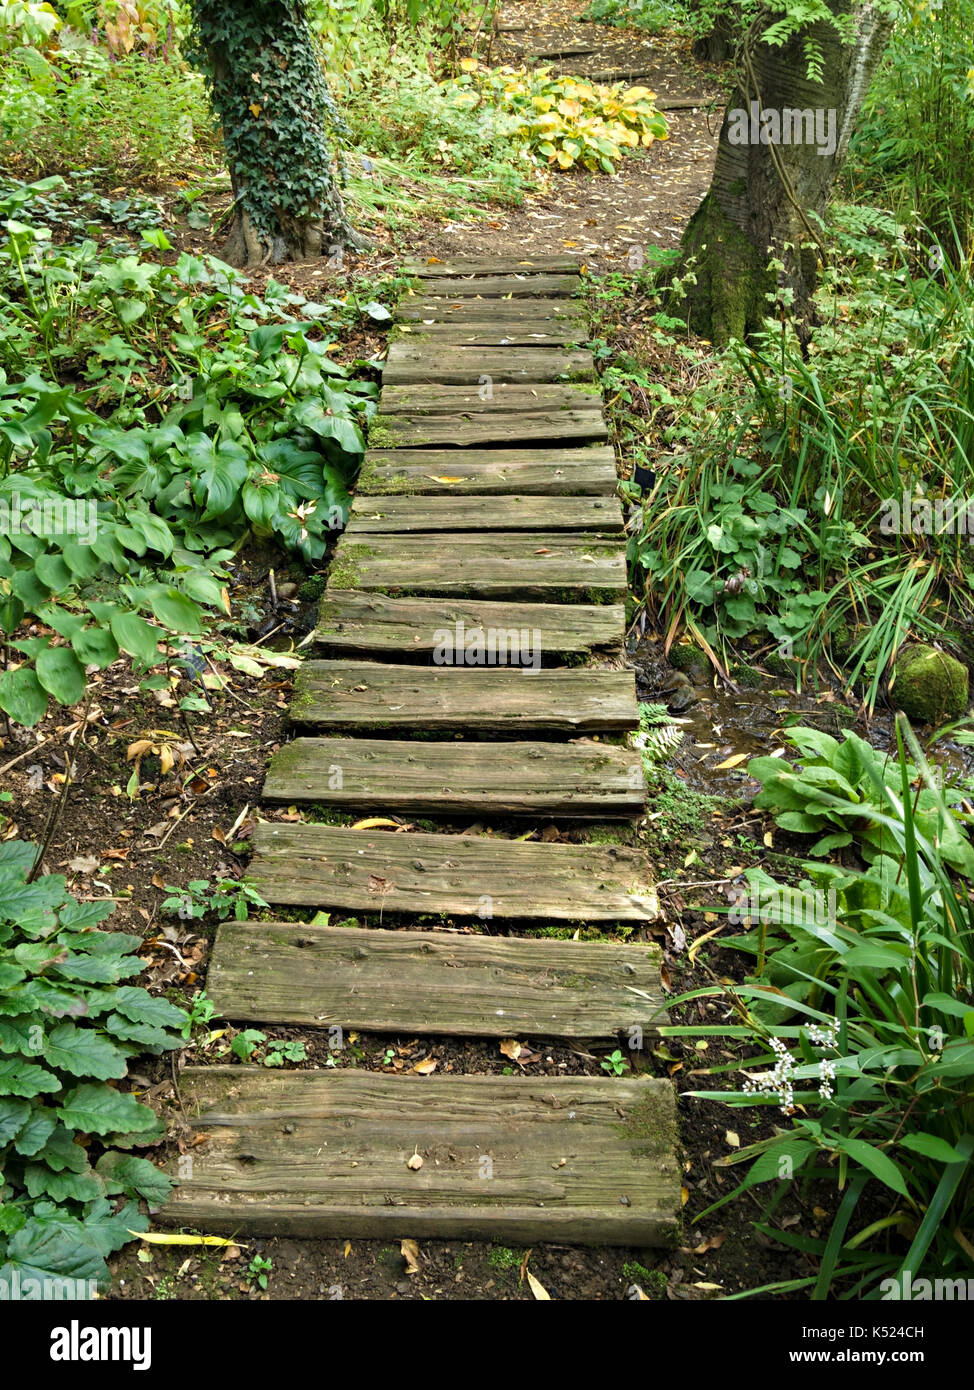 Old rustic woodland garden path made from split wooden timber logs, Coton Manor Gardens, Northamptonshire, England, UK Stock Photo